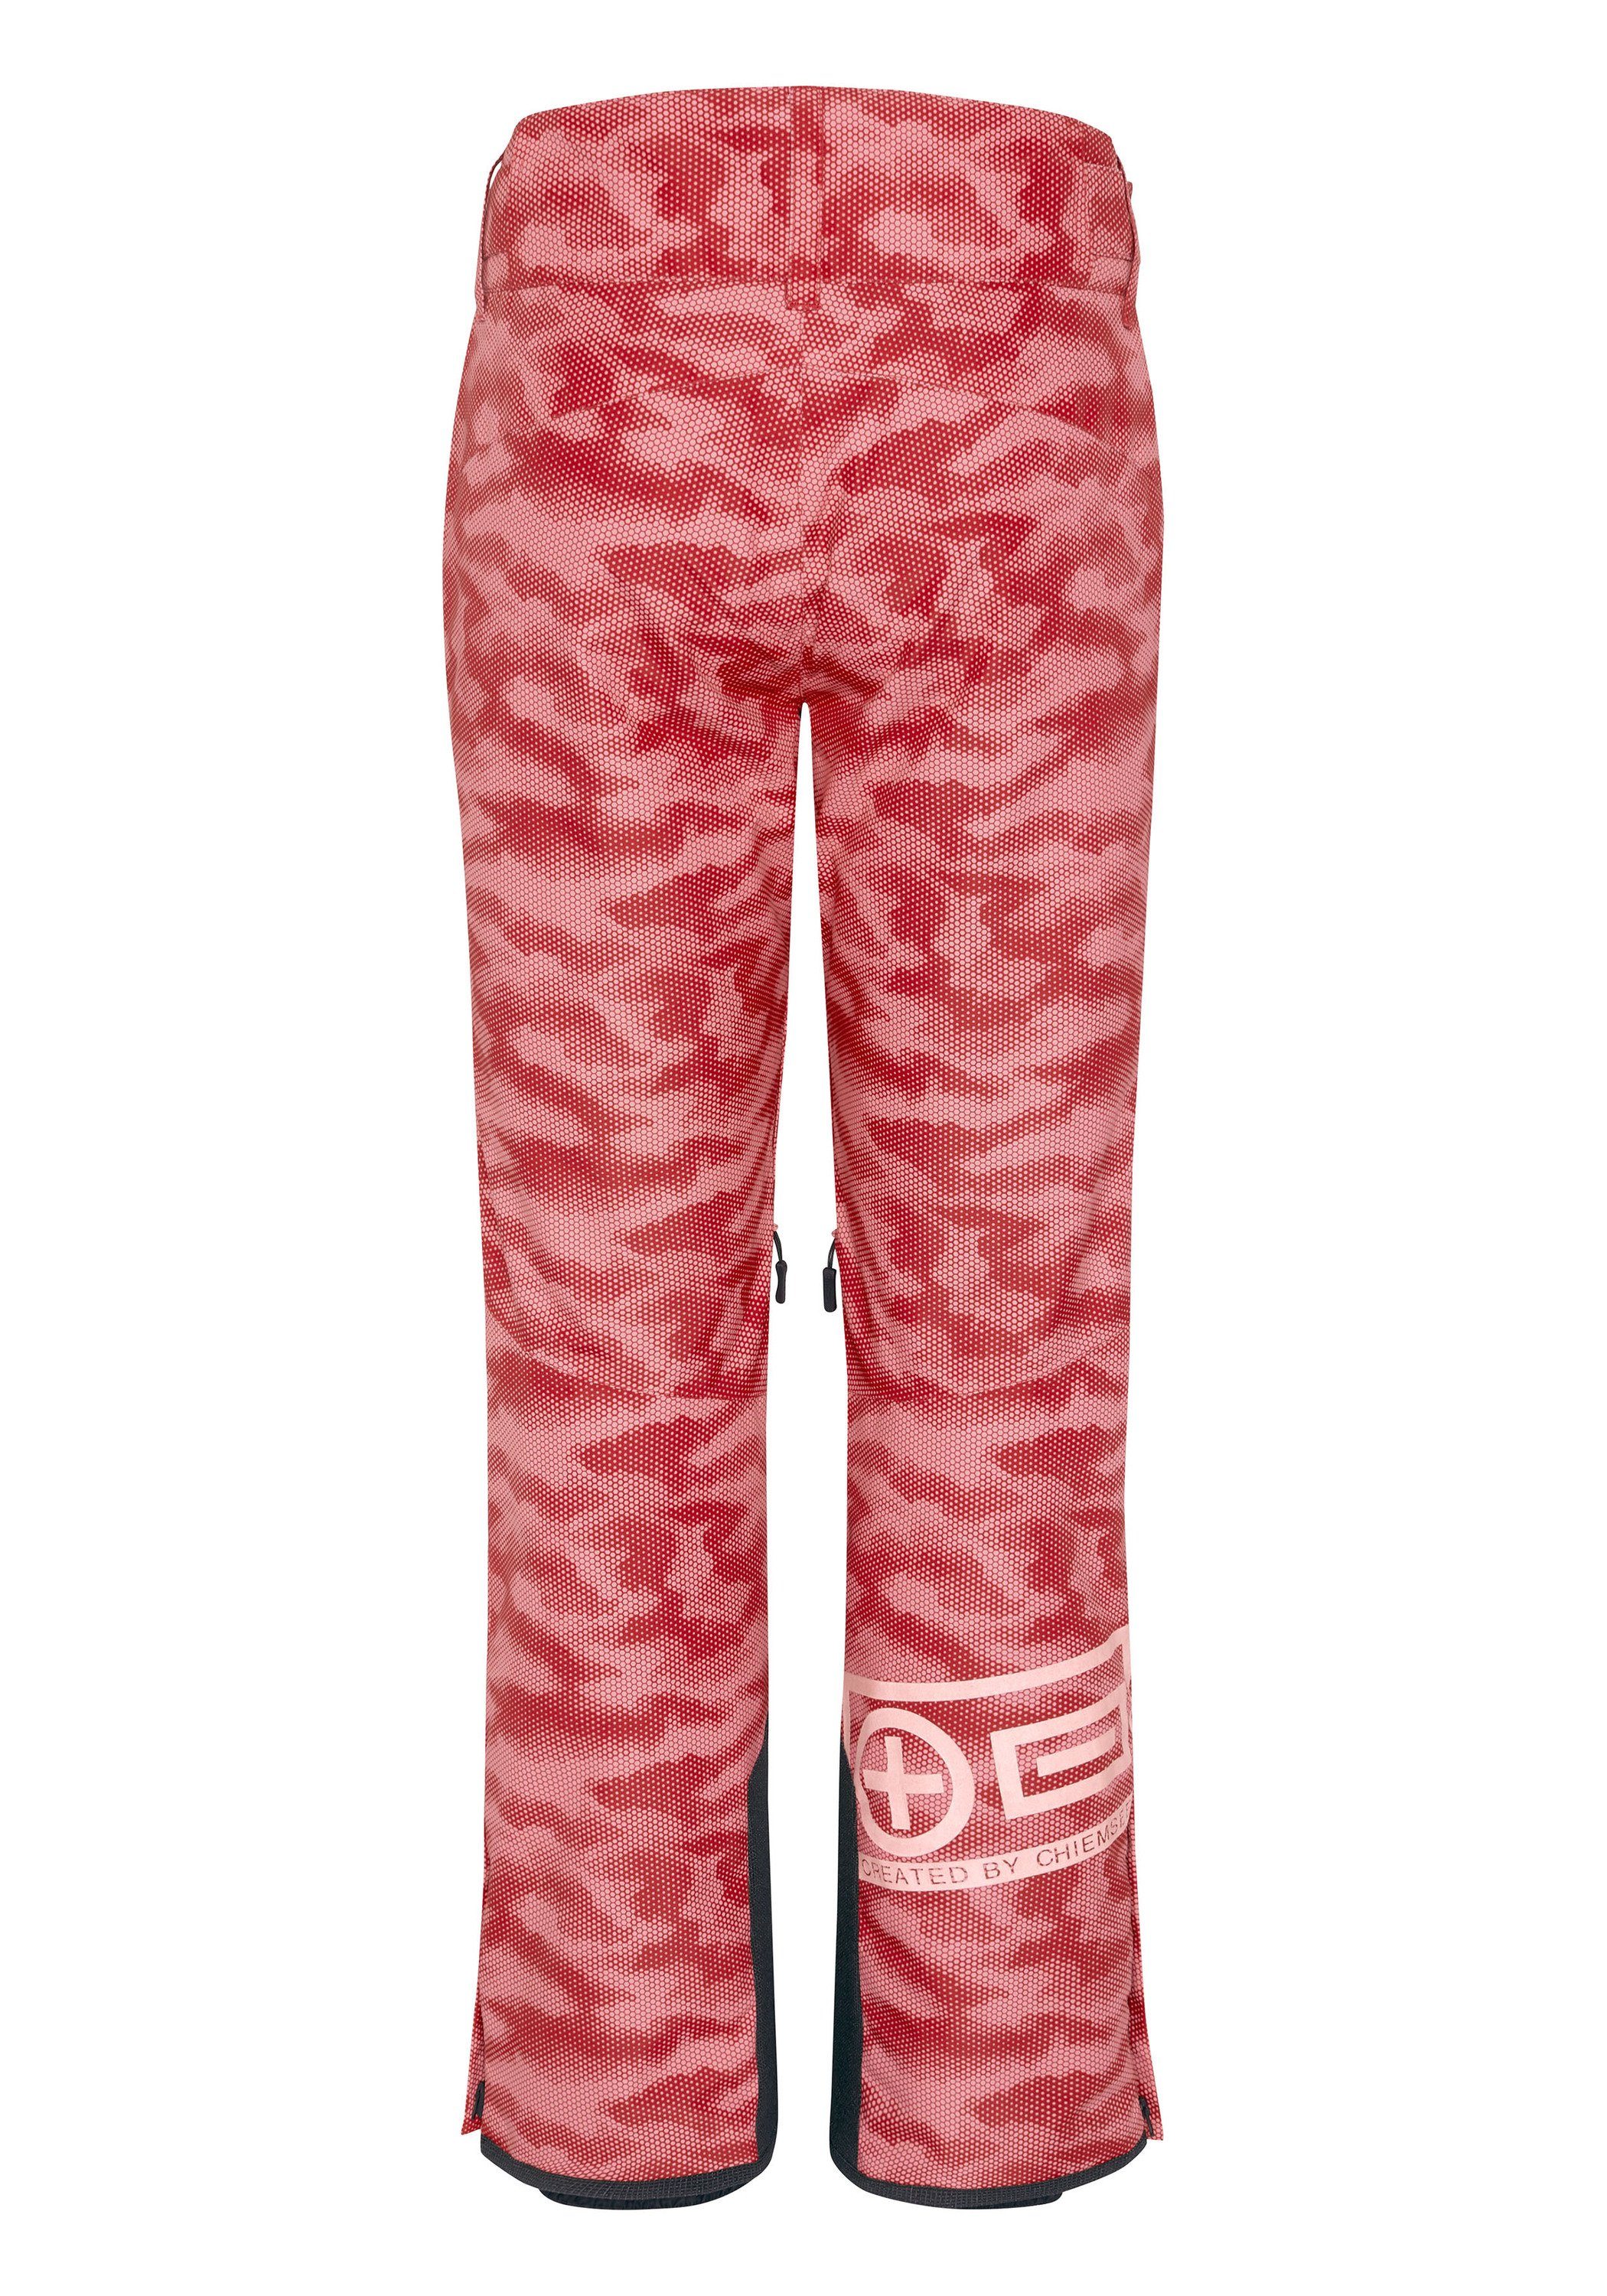 Sporthose Slim-Fit rosa/rosa Skihose mit hell 1 Chiemsee Allover-Muster